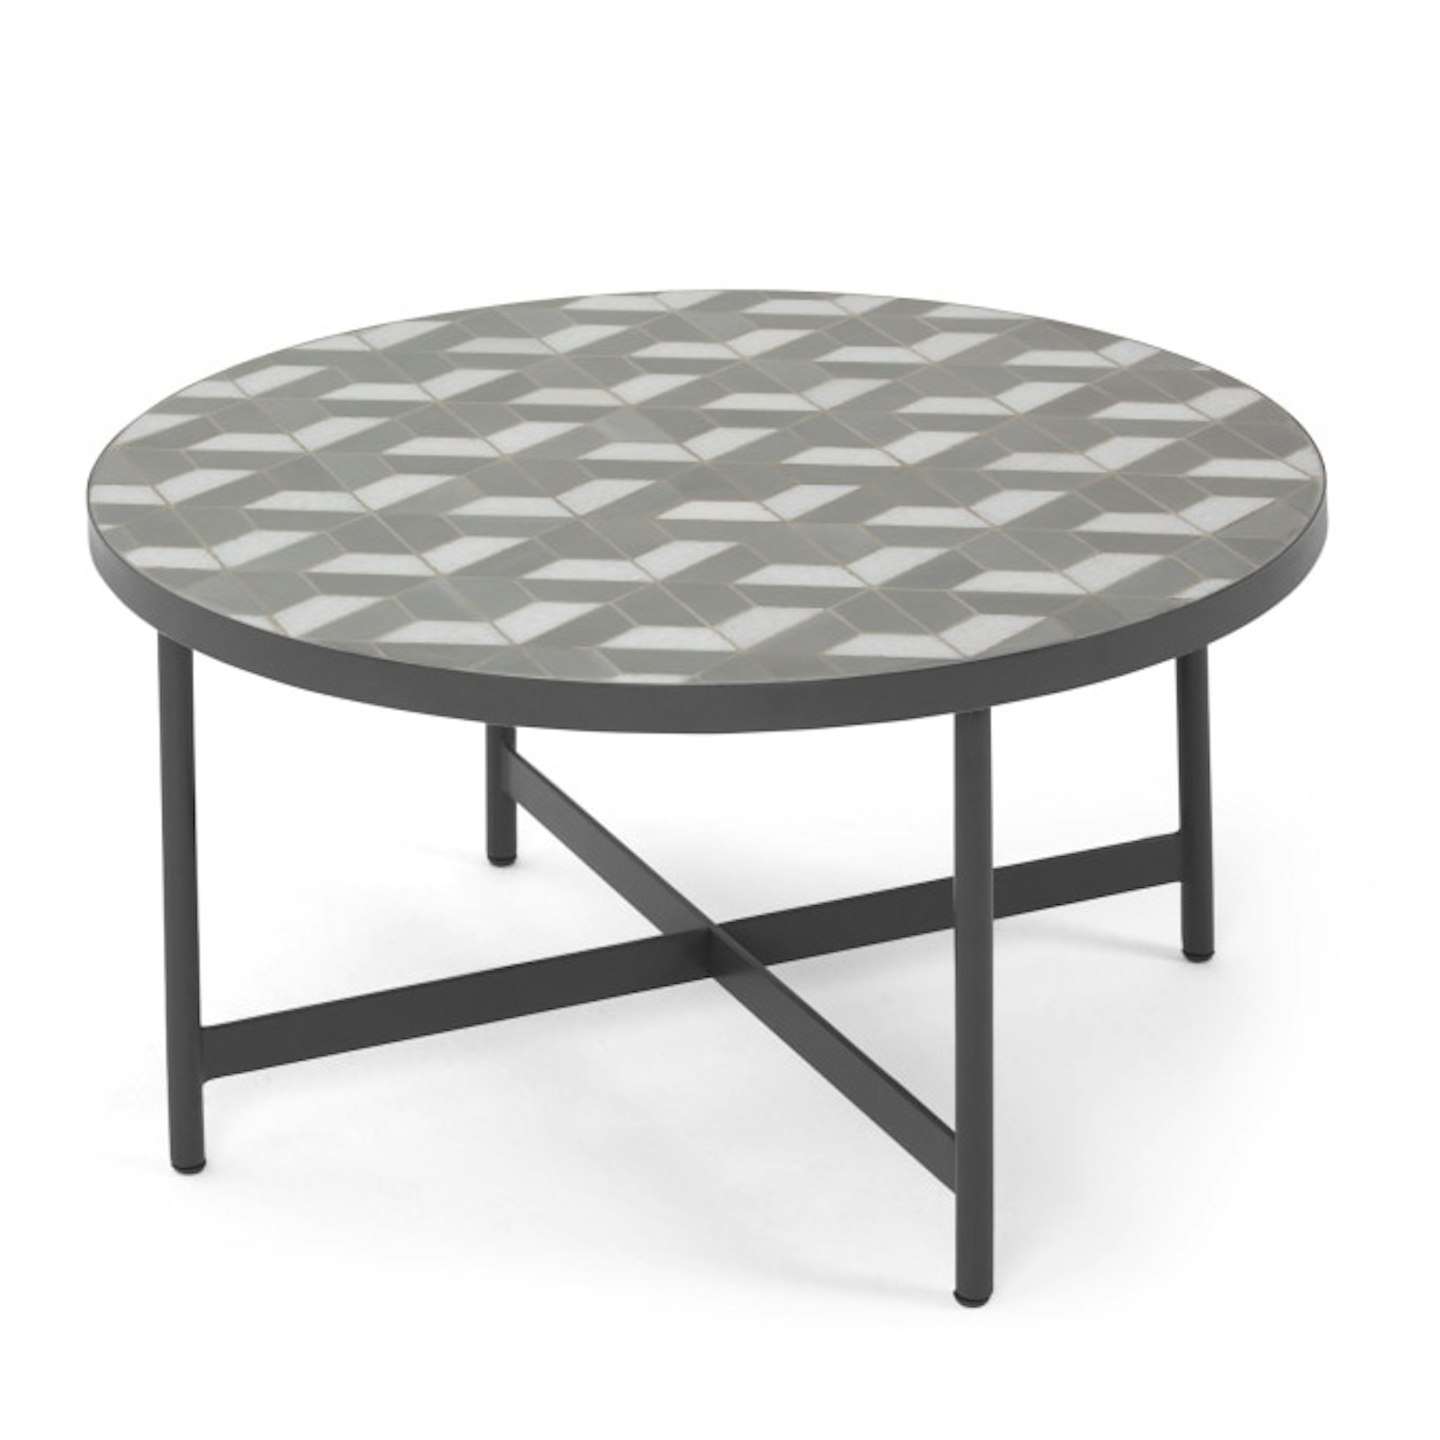 Indra Garden Coffee Table, Grey and White Marble